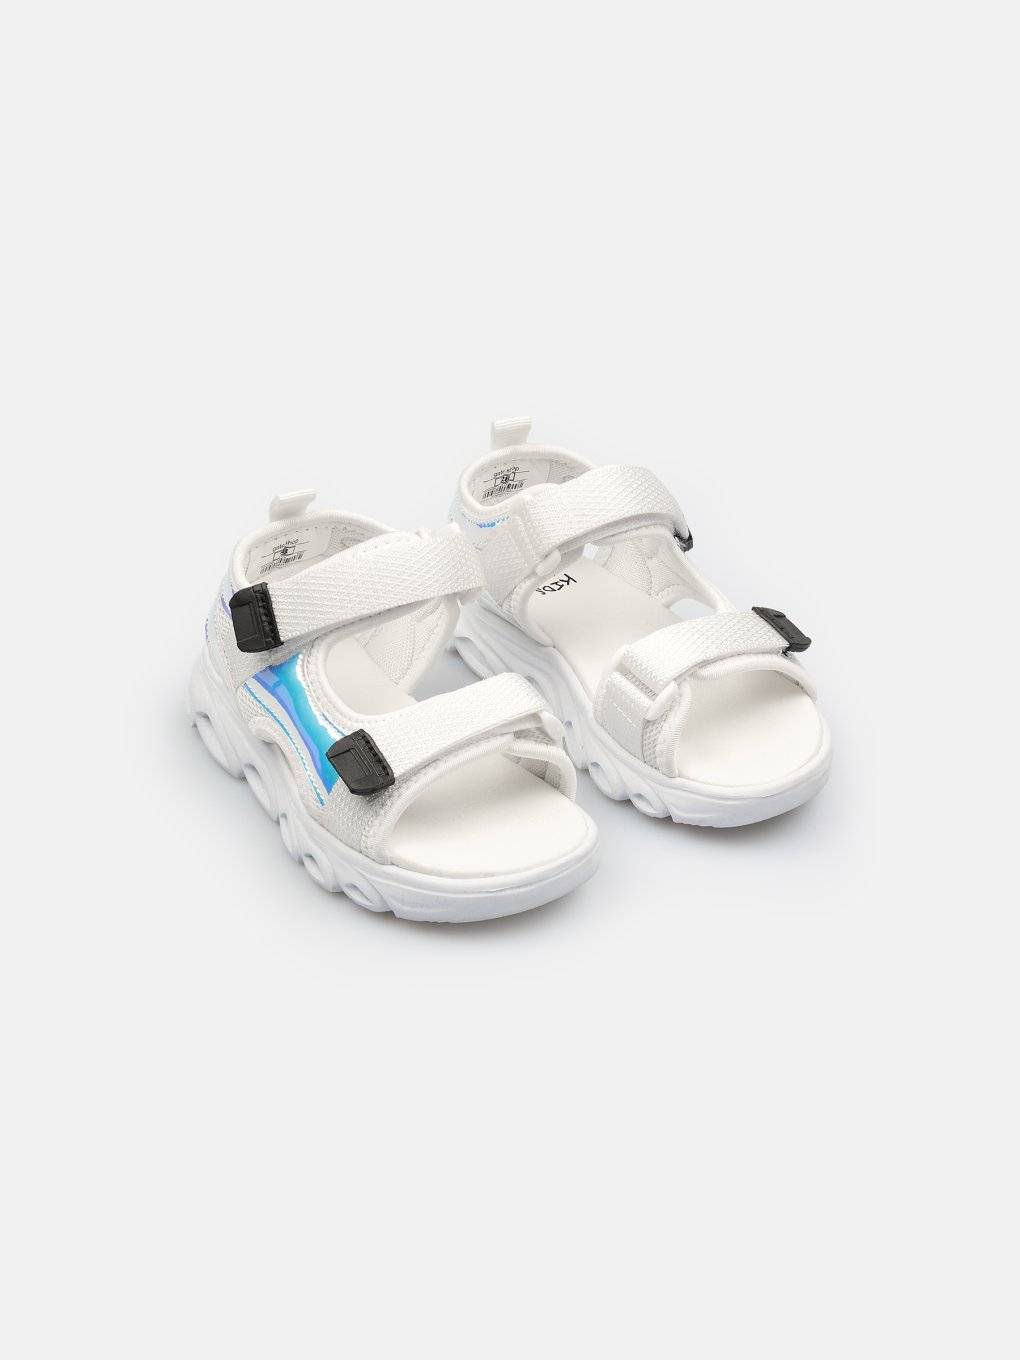 Sandals with velcro